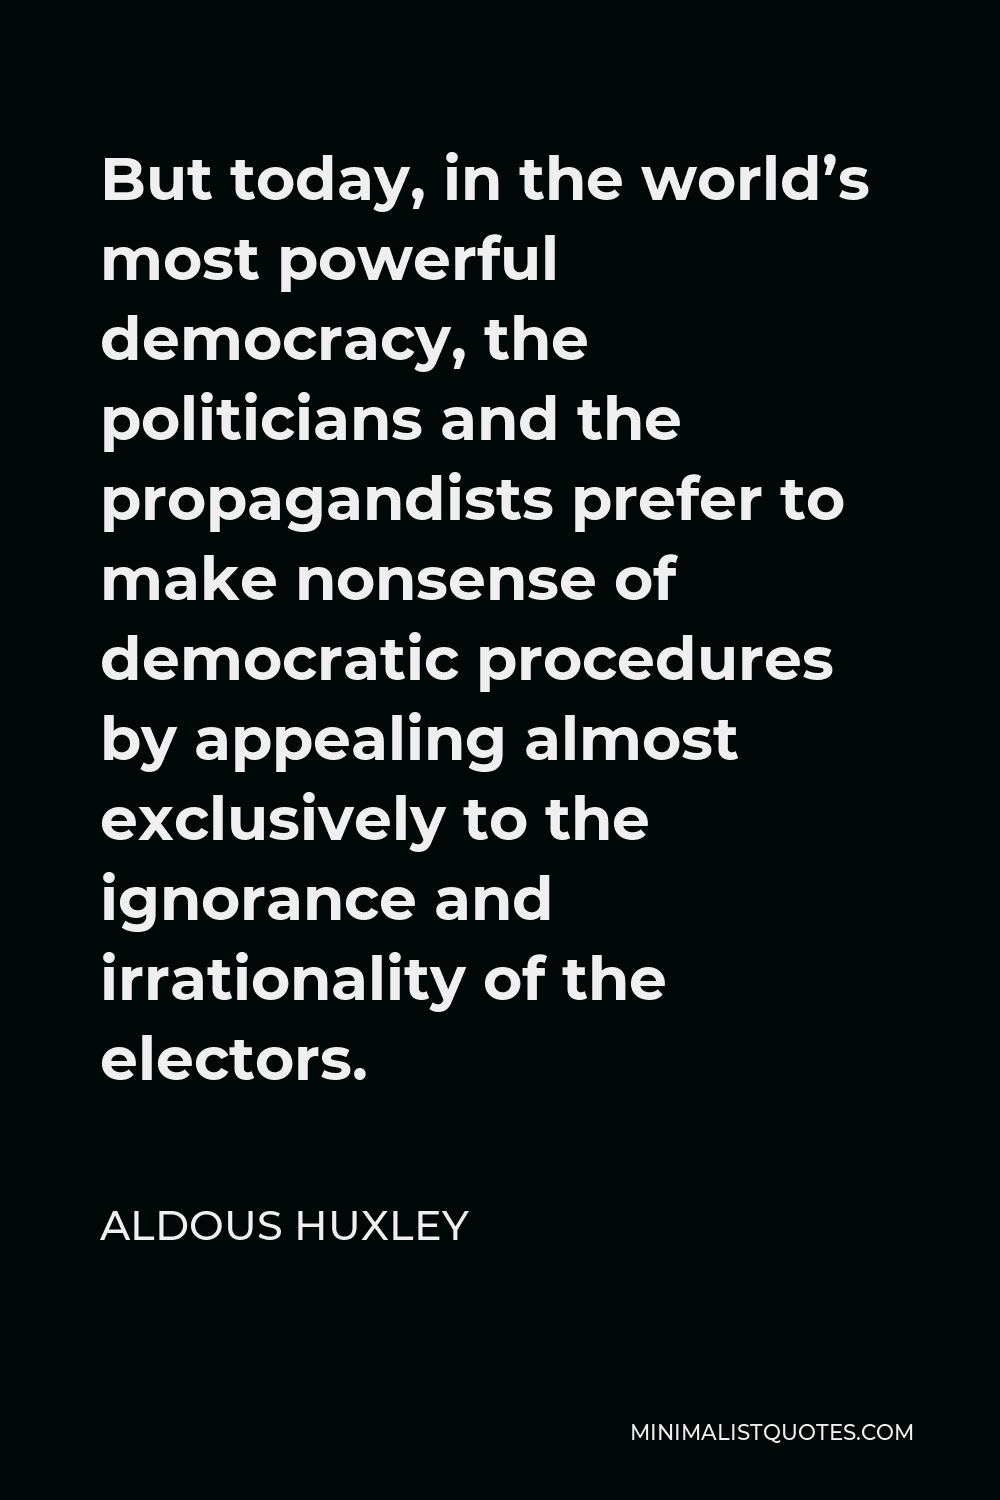 Aldous Huxley Quote - But today, in the world’s most powerful democracy, the politicians and the propagandists prefer to make nonsense of democratic procedures by appealing almost exclusively to the ignorance and irrationality of the electors.